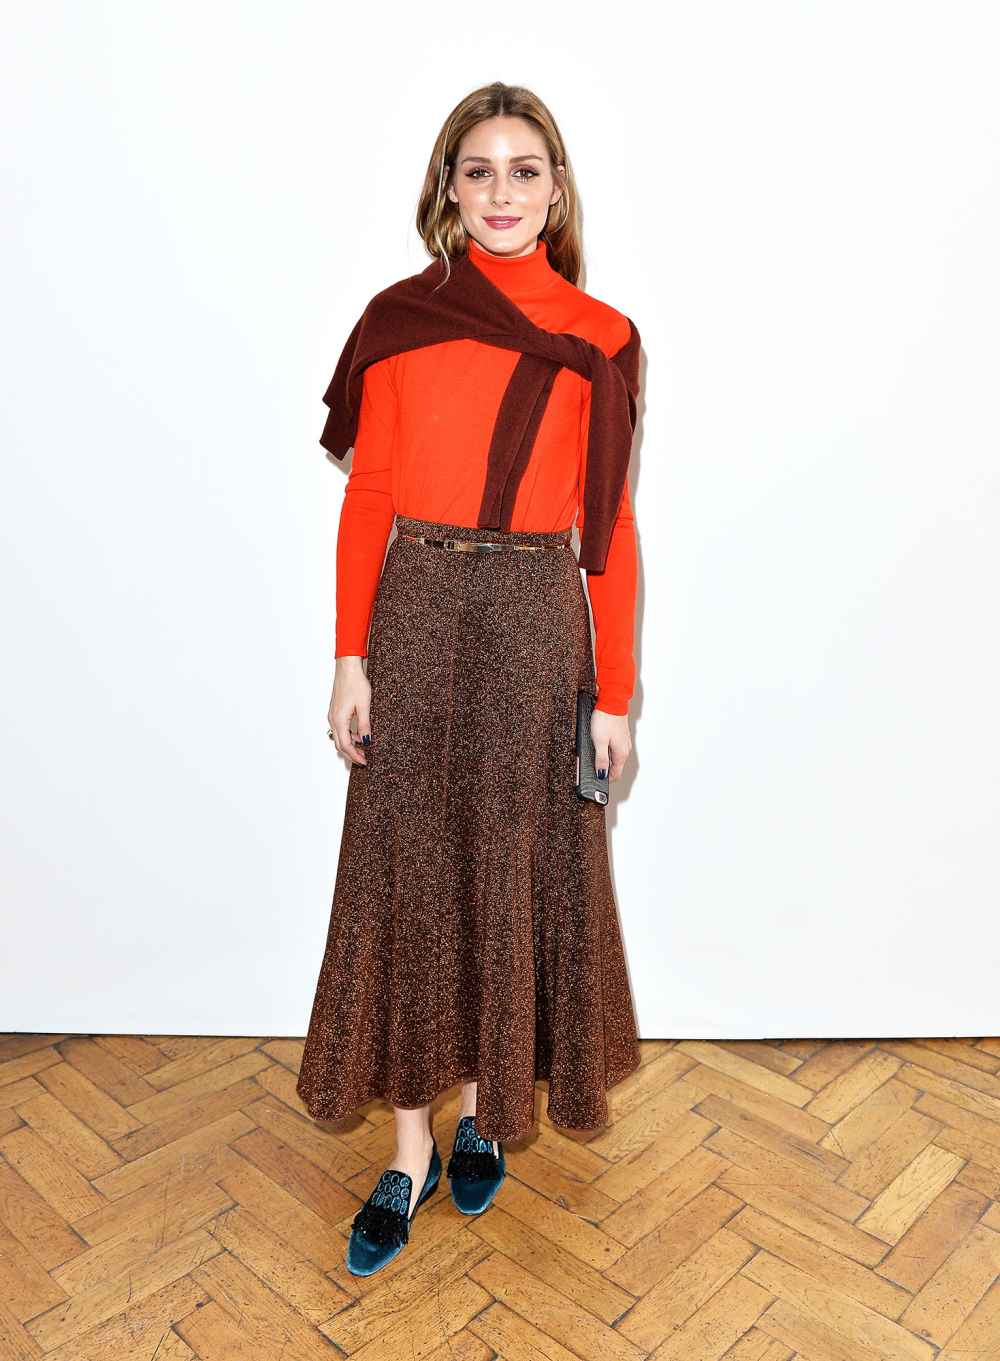 9 Reasons Birthday Girl Olivia Palermo Is Our Forever Style Crush